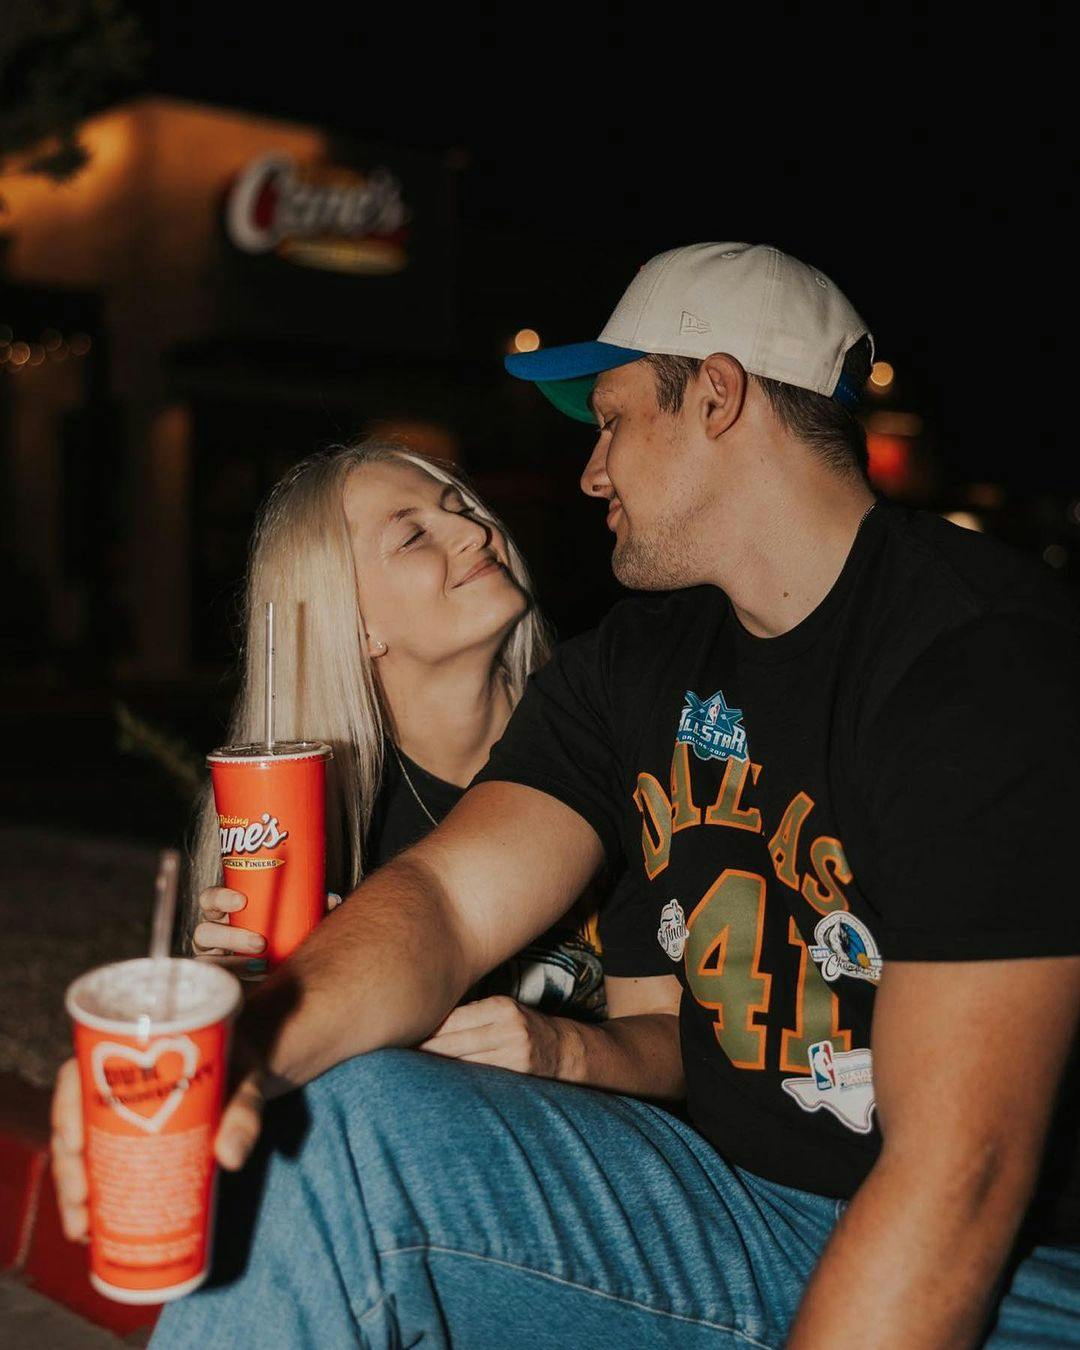 @lizaphor and her boyfriend sharing a moment at Cane's